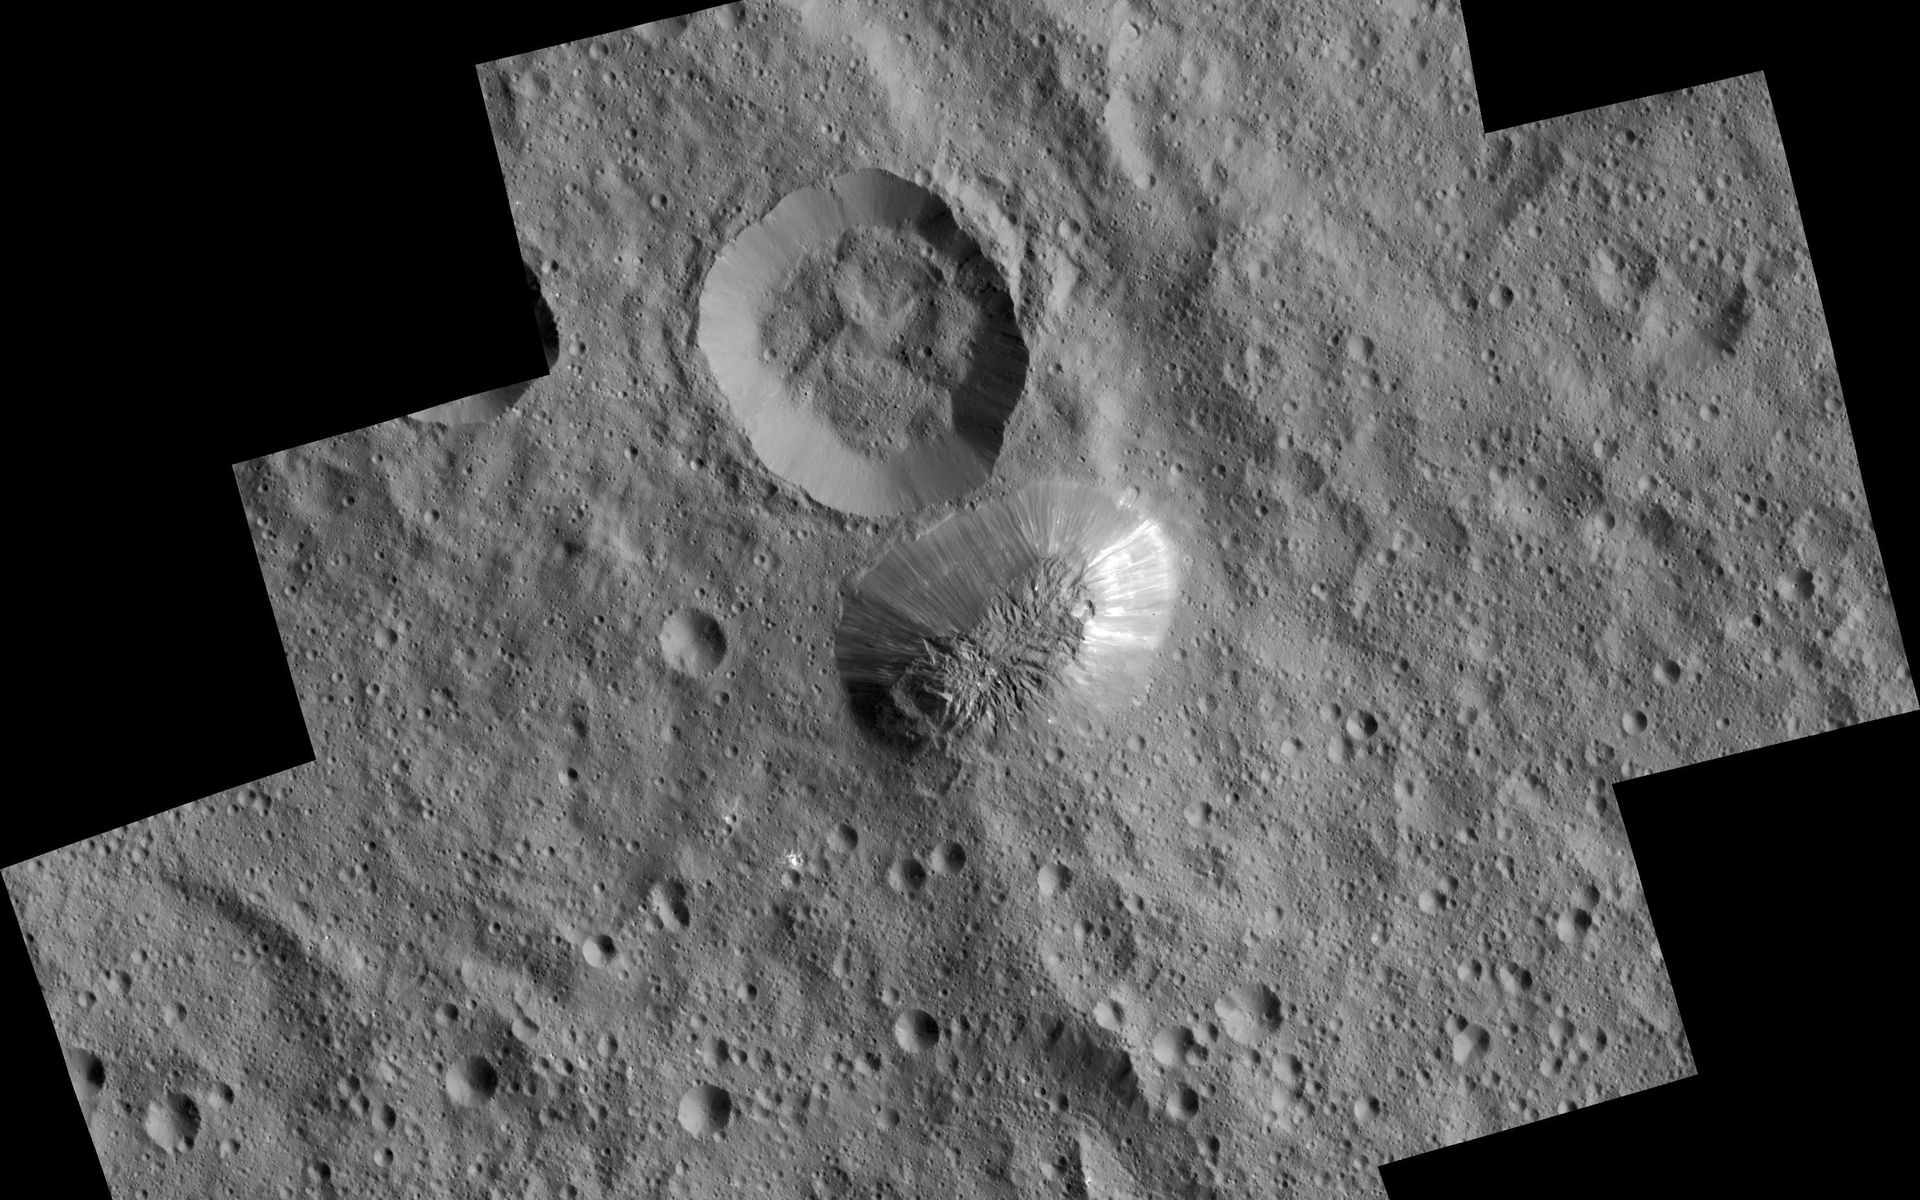 Ahuna Mons on Ceres as seen by the Dawn spacecraft